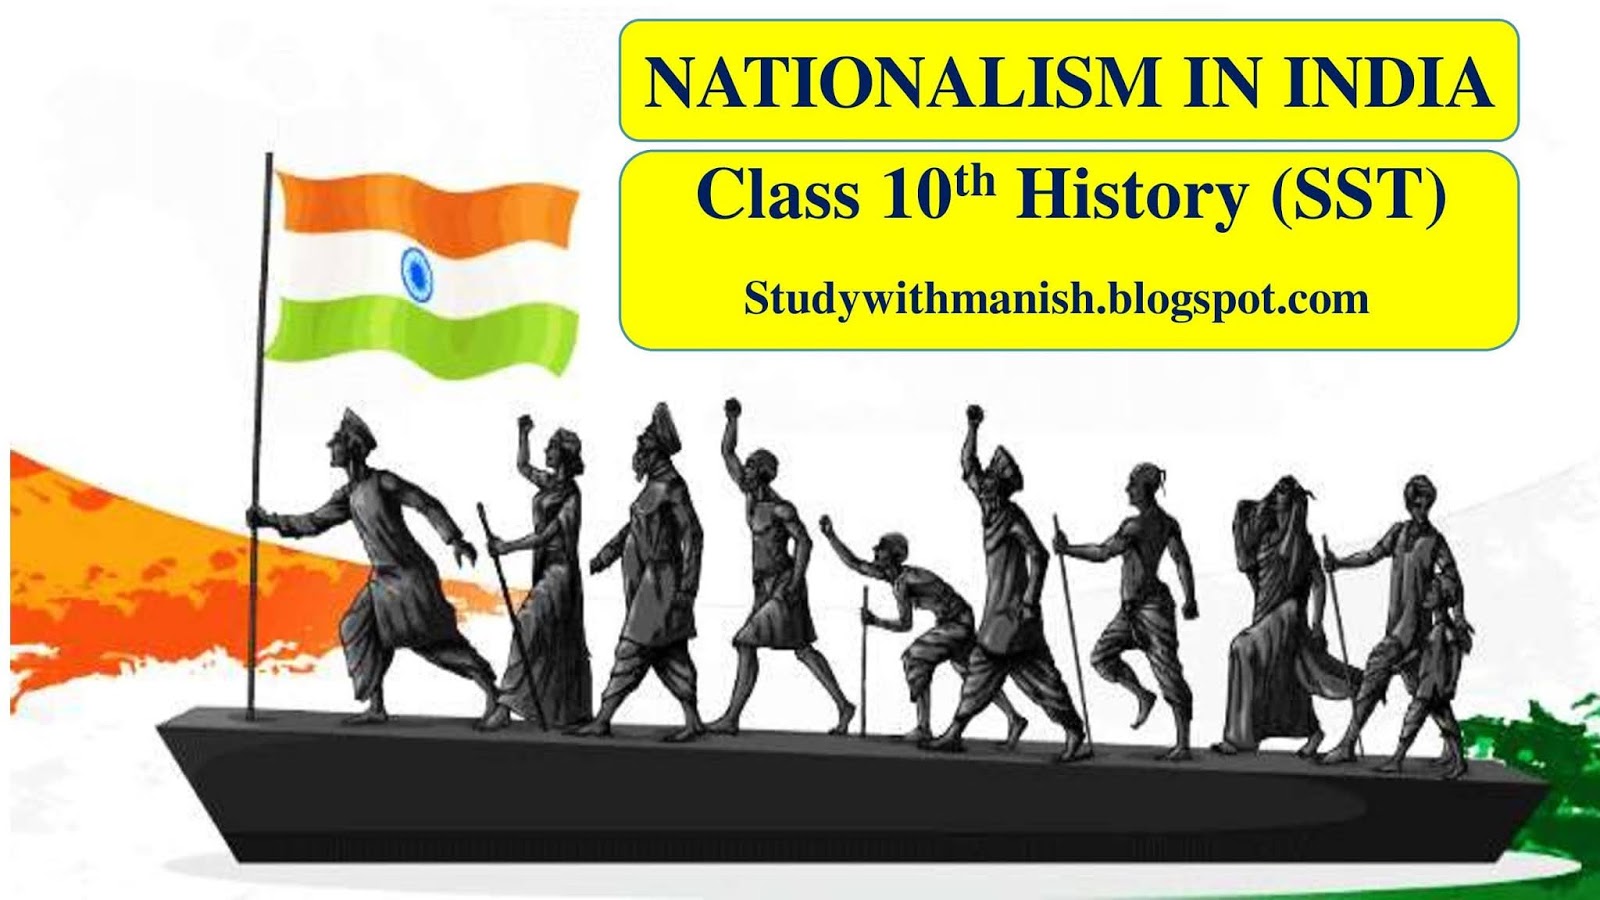 class 10 history nationalism in india case study questions